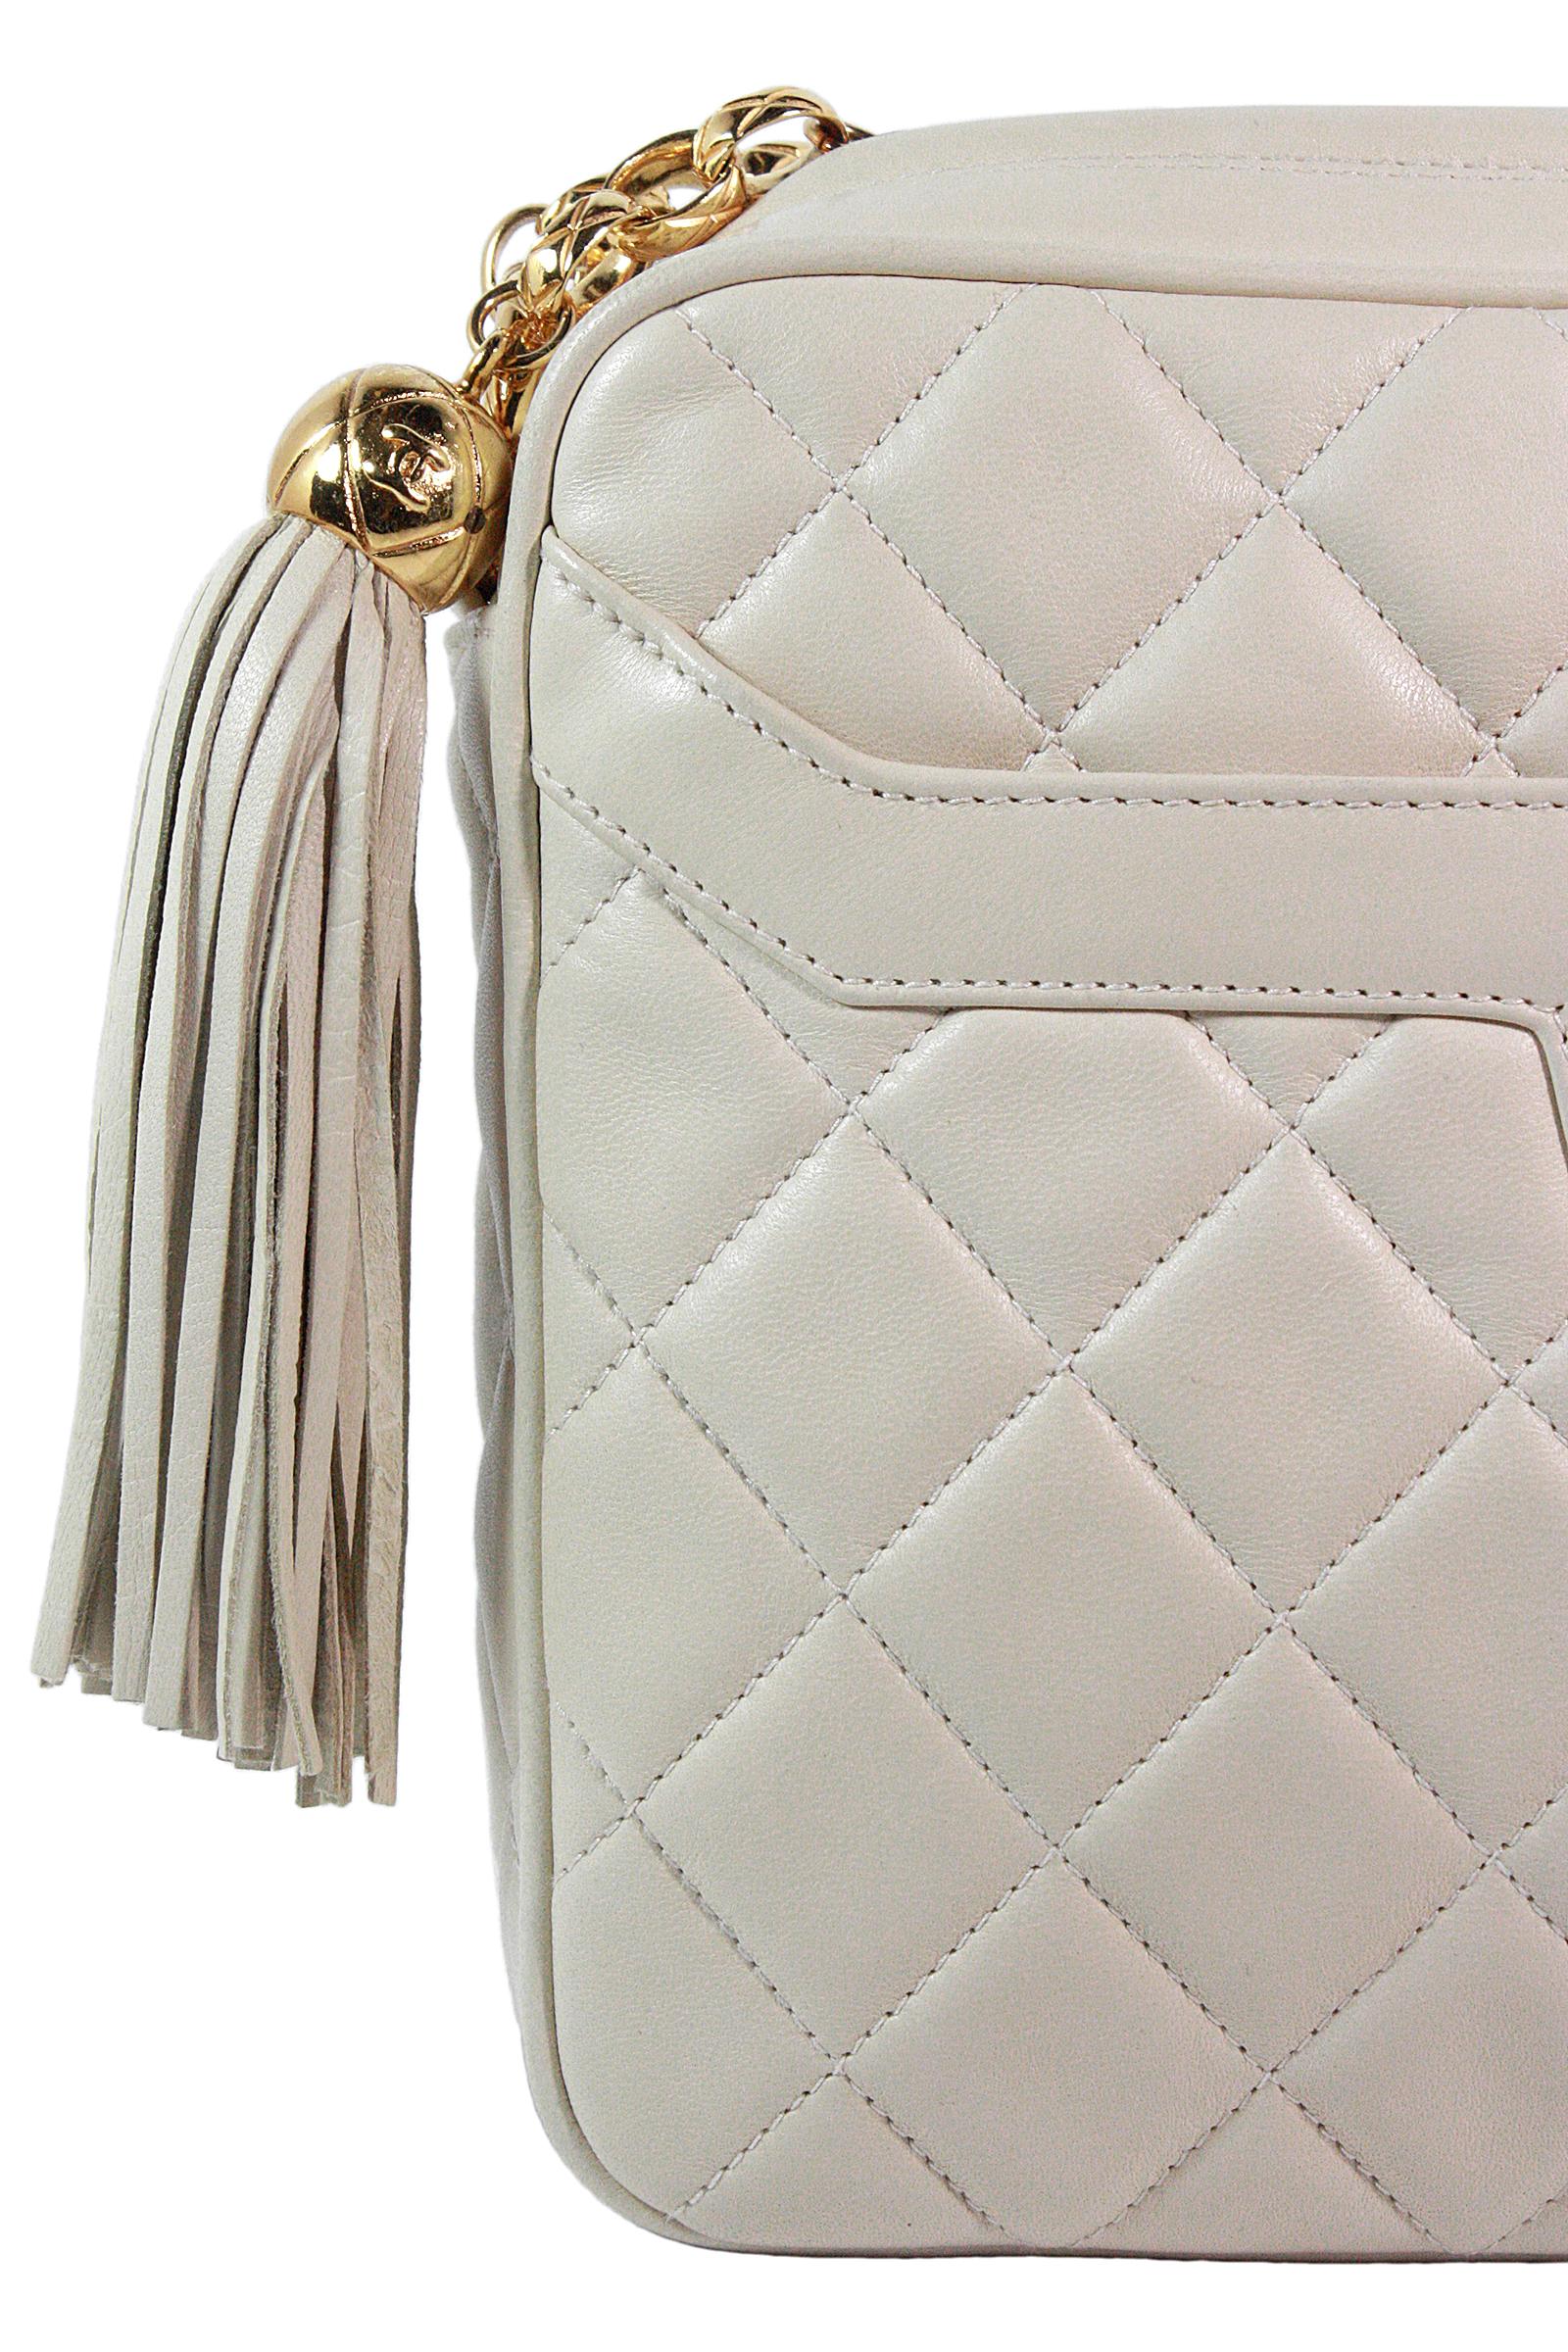 Beige Chanel Cream Quilted Leather Crossbody Bag For Sale